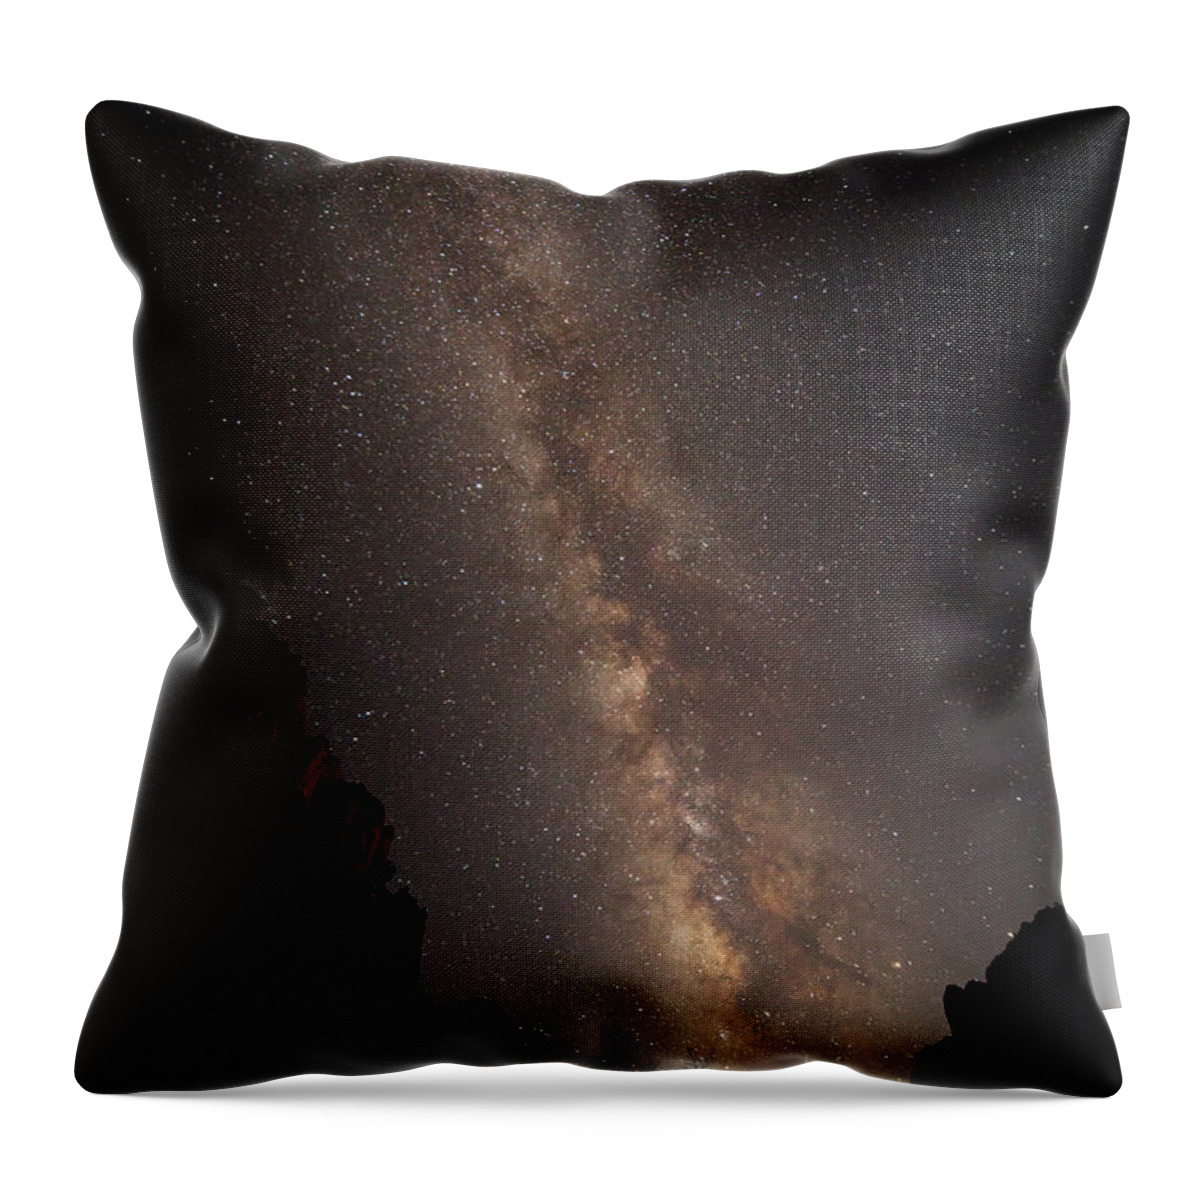 Milkyway Throw Pillow featuring the photograph A Dark Night In Zion Canyon #2 by David Watkins